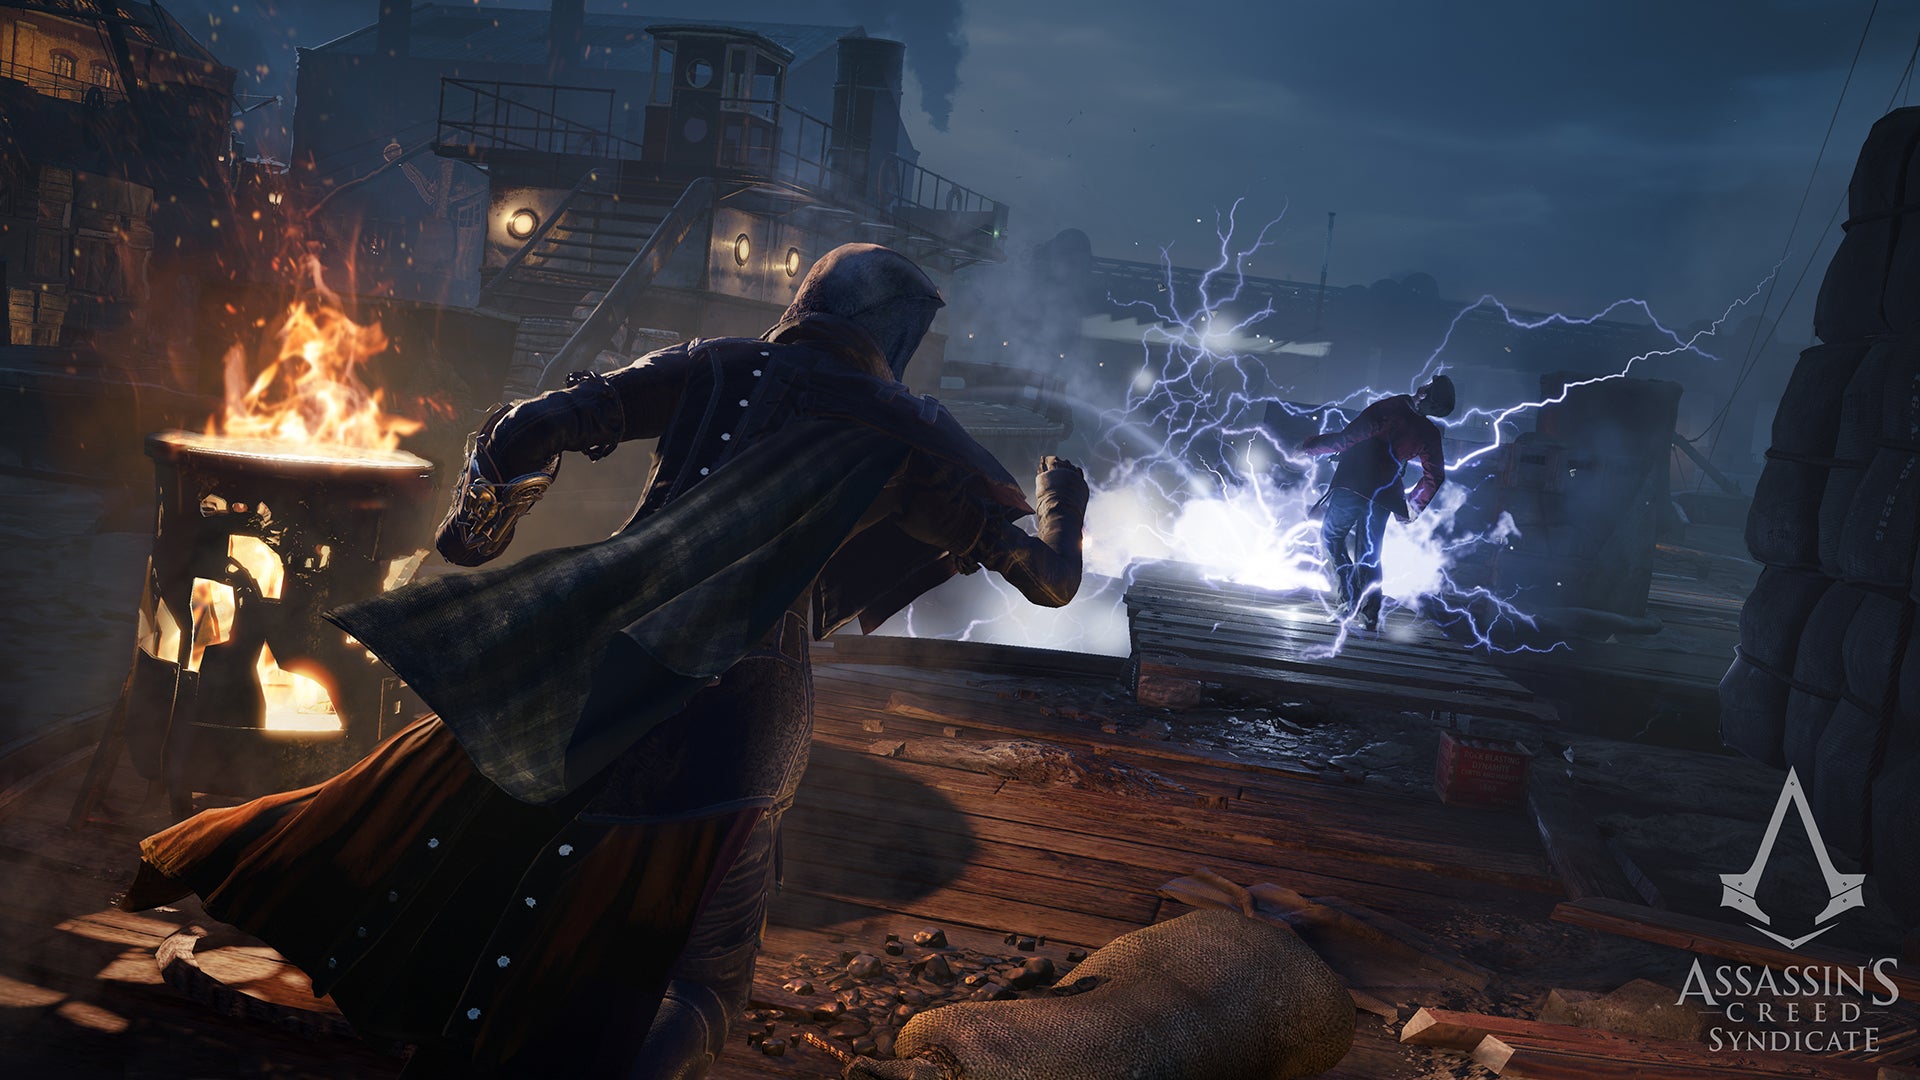 Image for Assassin's Creed Syndicate Sequence 5 - Breaking News